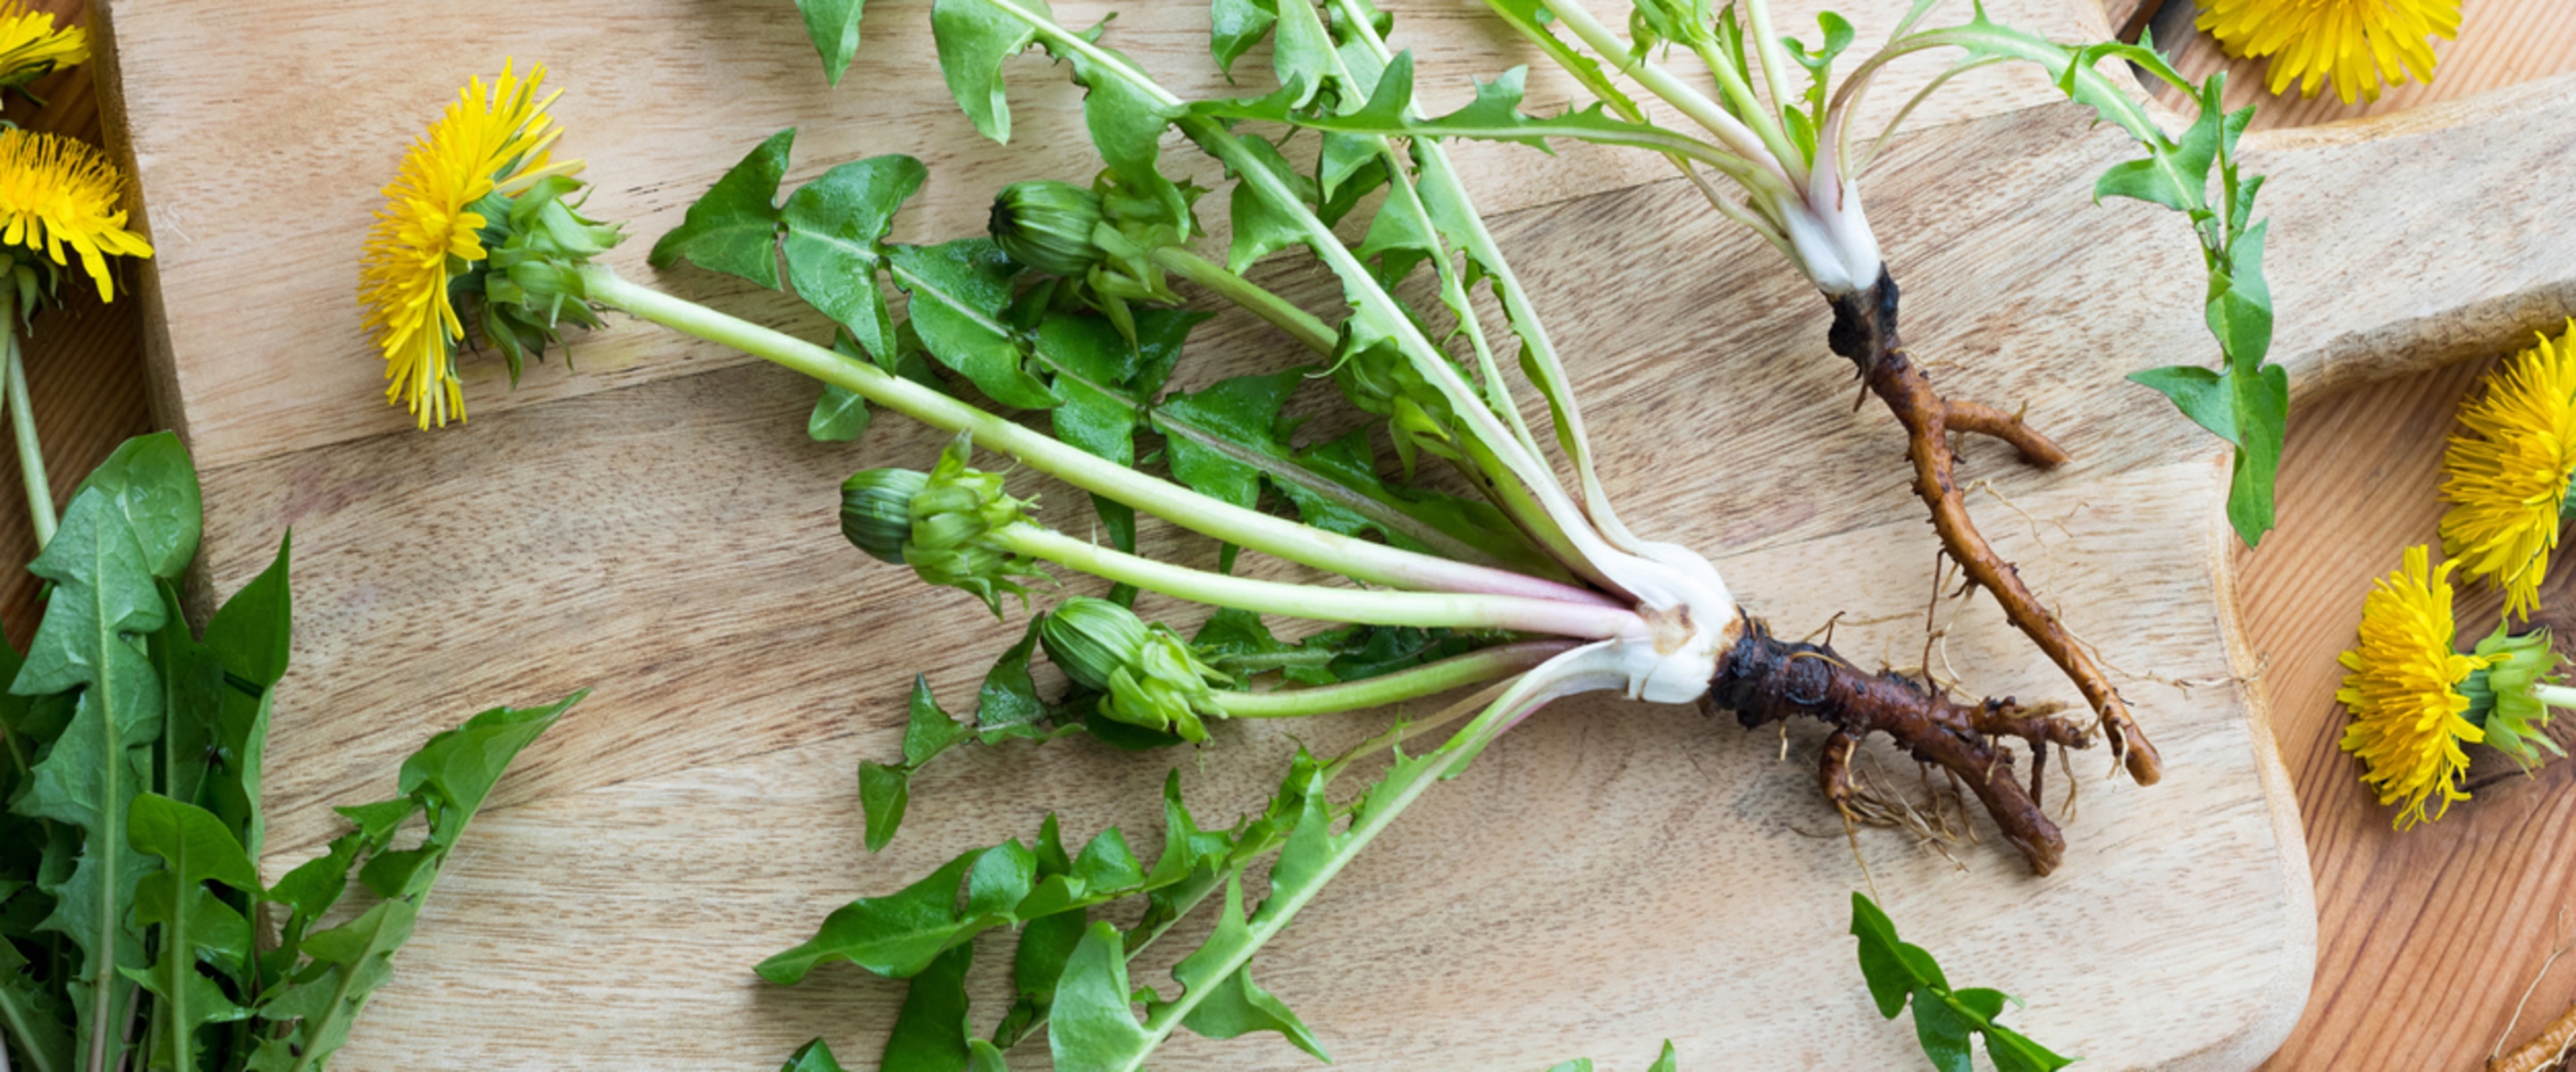 7 Tips to Help You Start Foraging Dandelions, Mallow, and More From Your Own Backyard